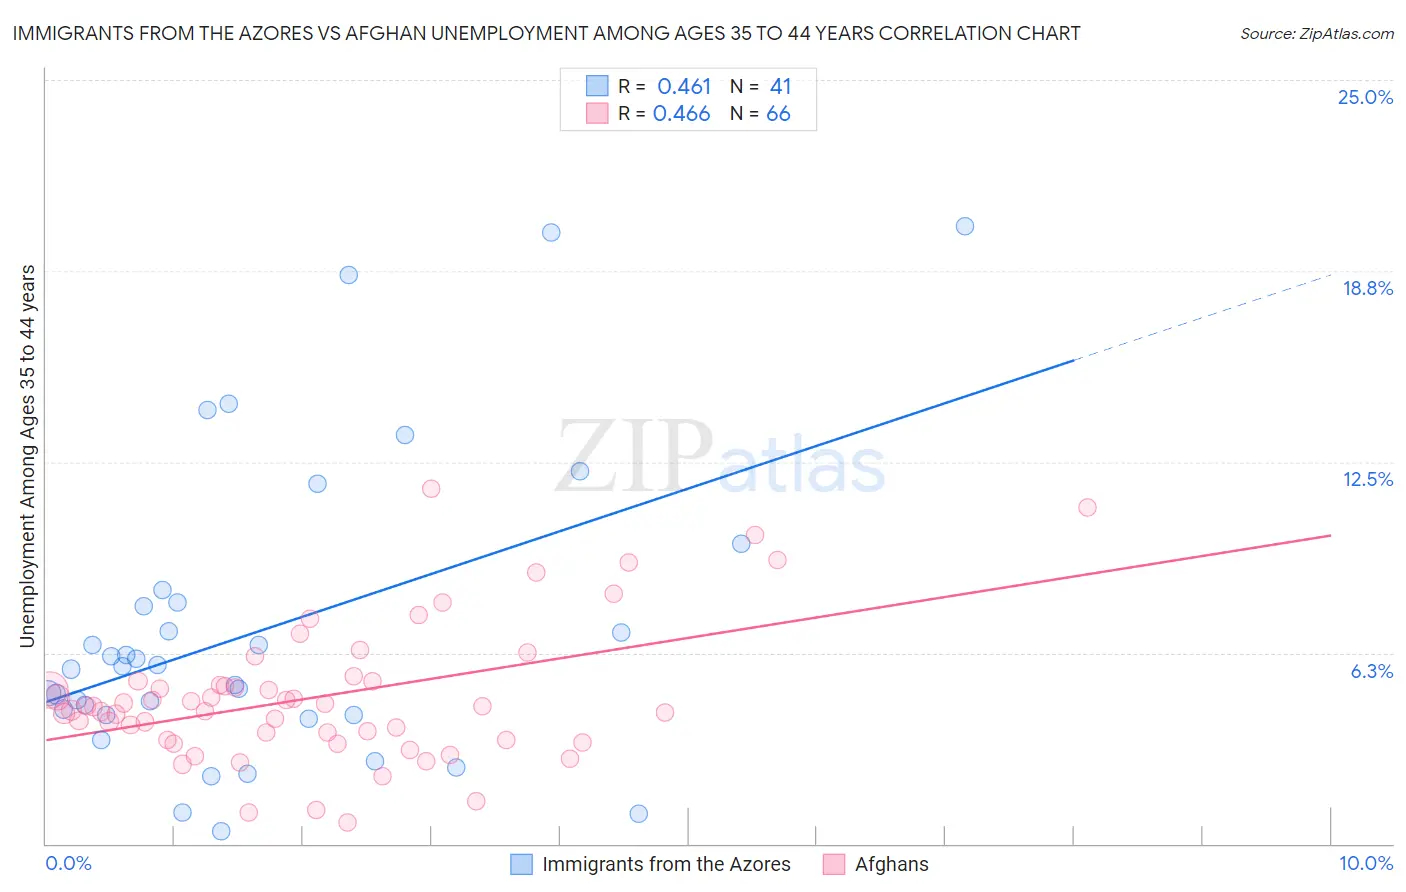 Immigrants from the Azores vs Afghan Unemployment Among Ages 35 to 44 years